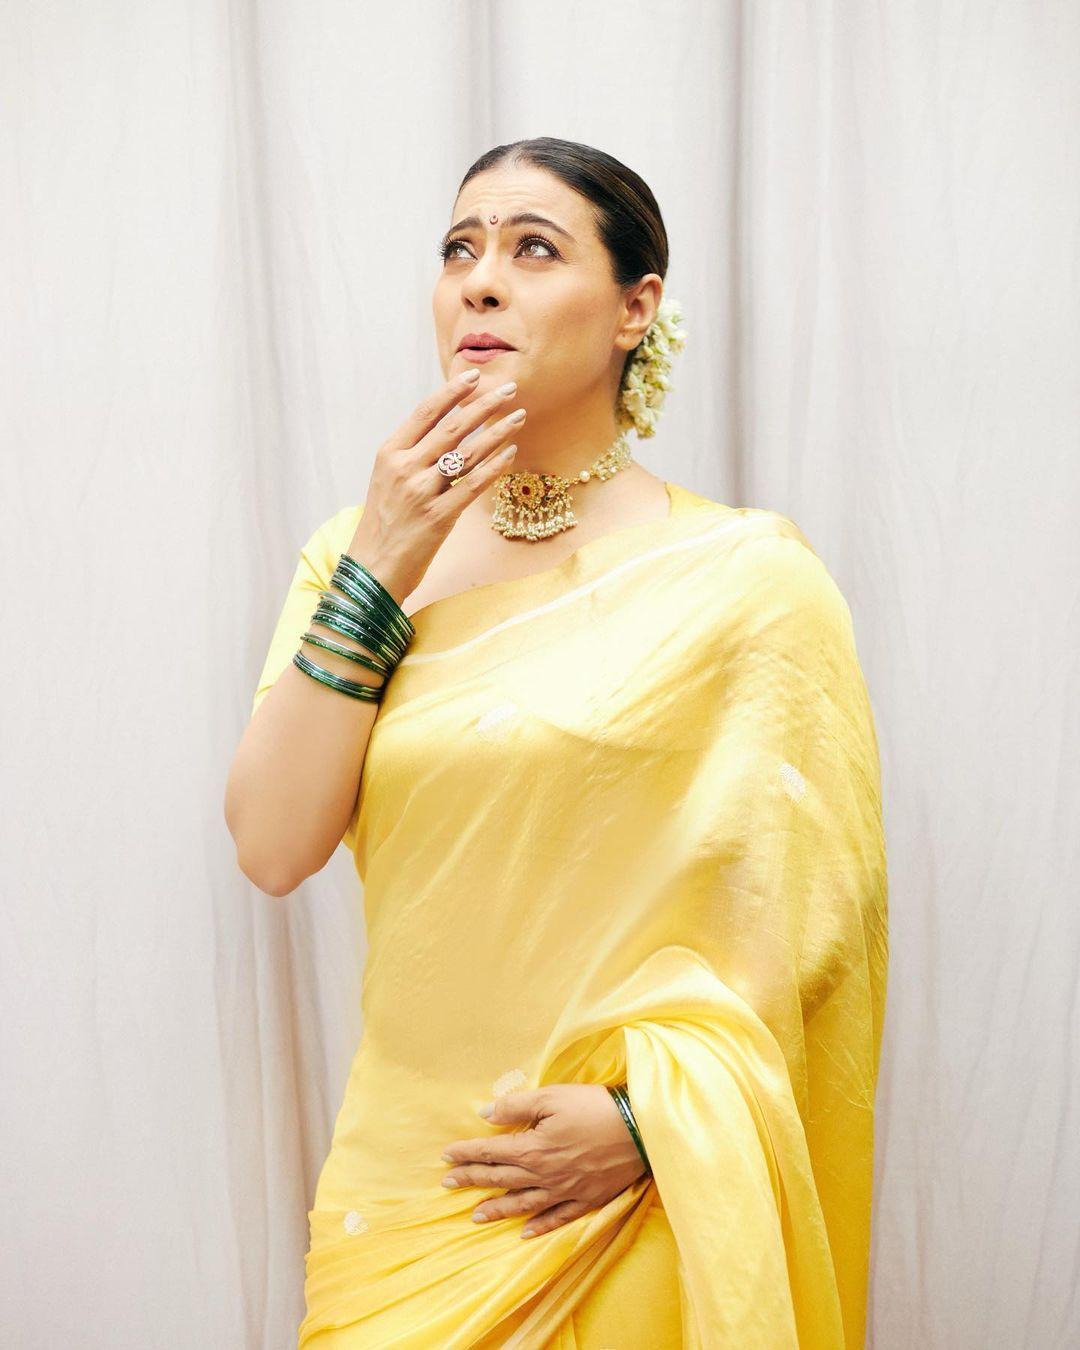 For Chaitra Navratri Day 3, you might want to wear a stunning yellow saree just like Kajol's. She rocked a yellow saree and blouse from Raw Mango, looking absolutely beautiful in her Indian attire. 